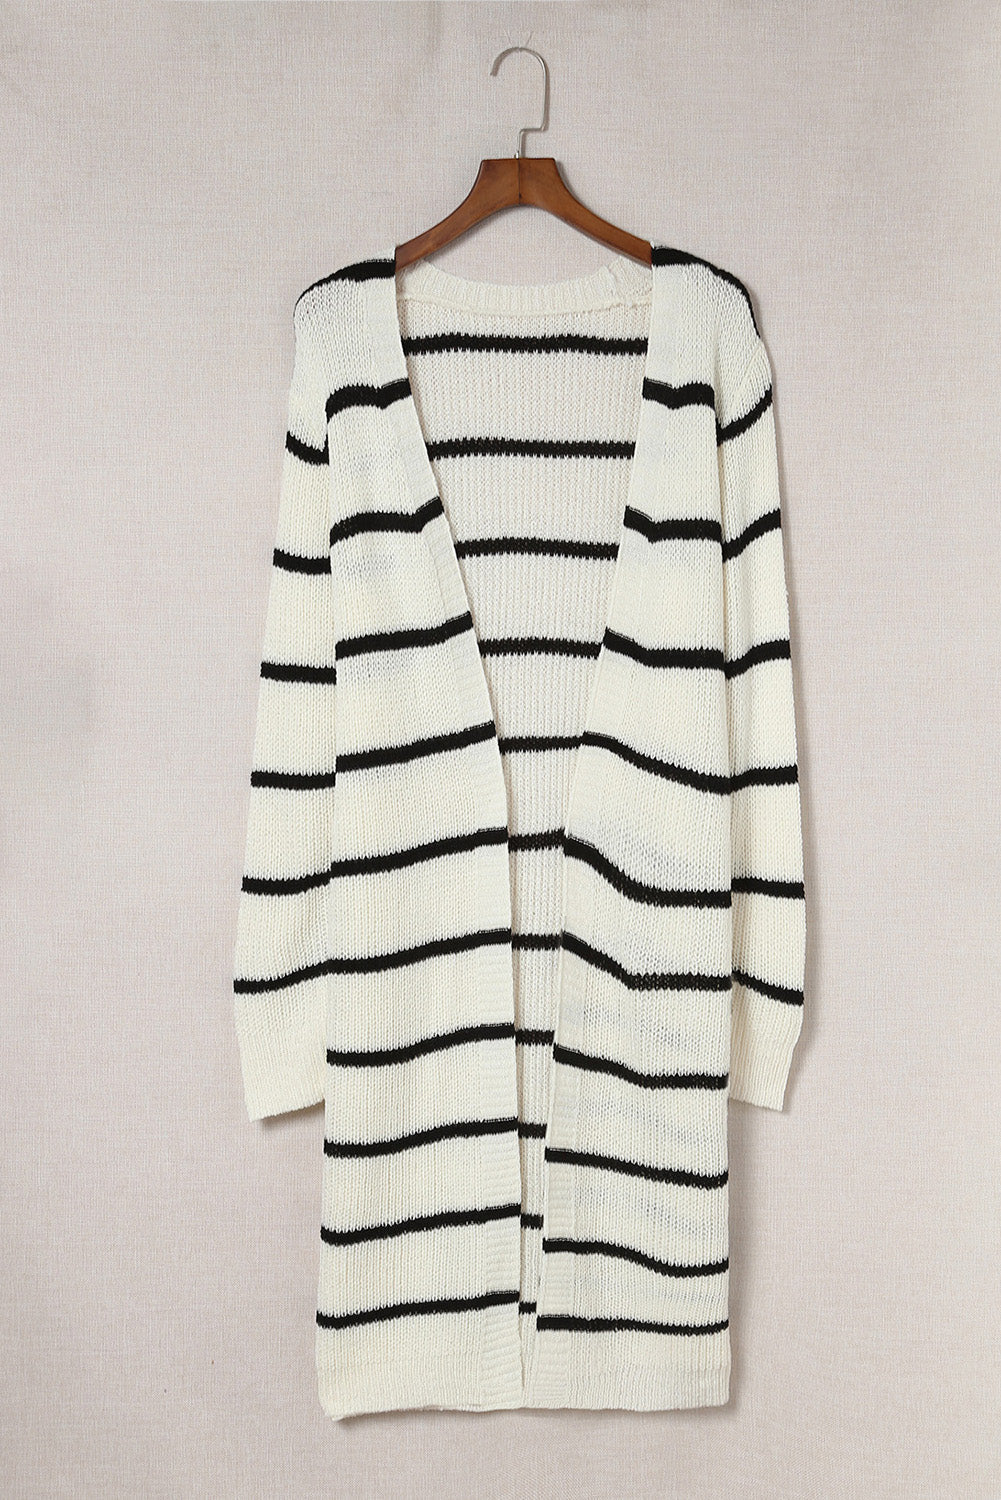 Striped Open Front Rib-Knit Duster Cardigan - Women’s Clothing & Accessories - Shirts & Tops - 10 - 2024